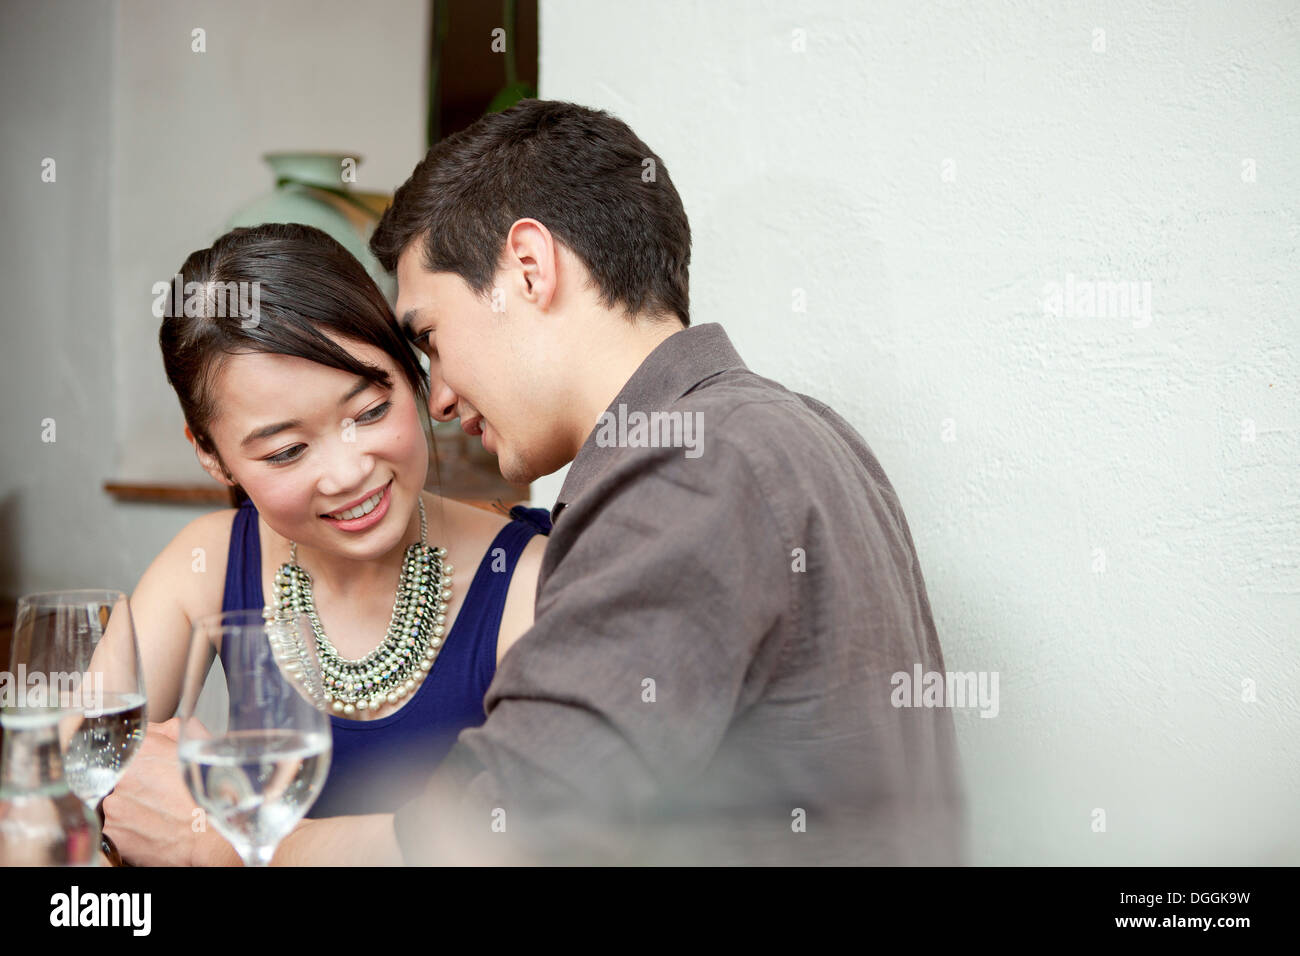 Young couple in restaurant, man whispering Stock Photo